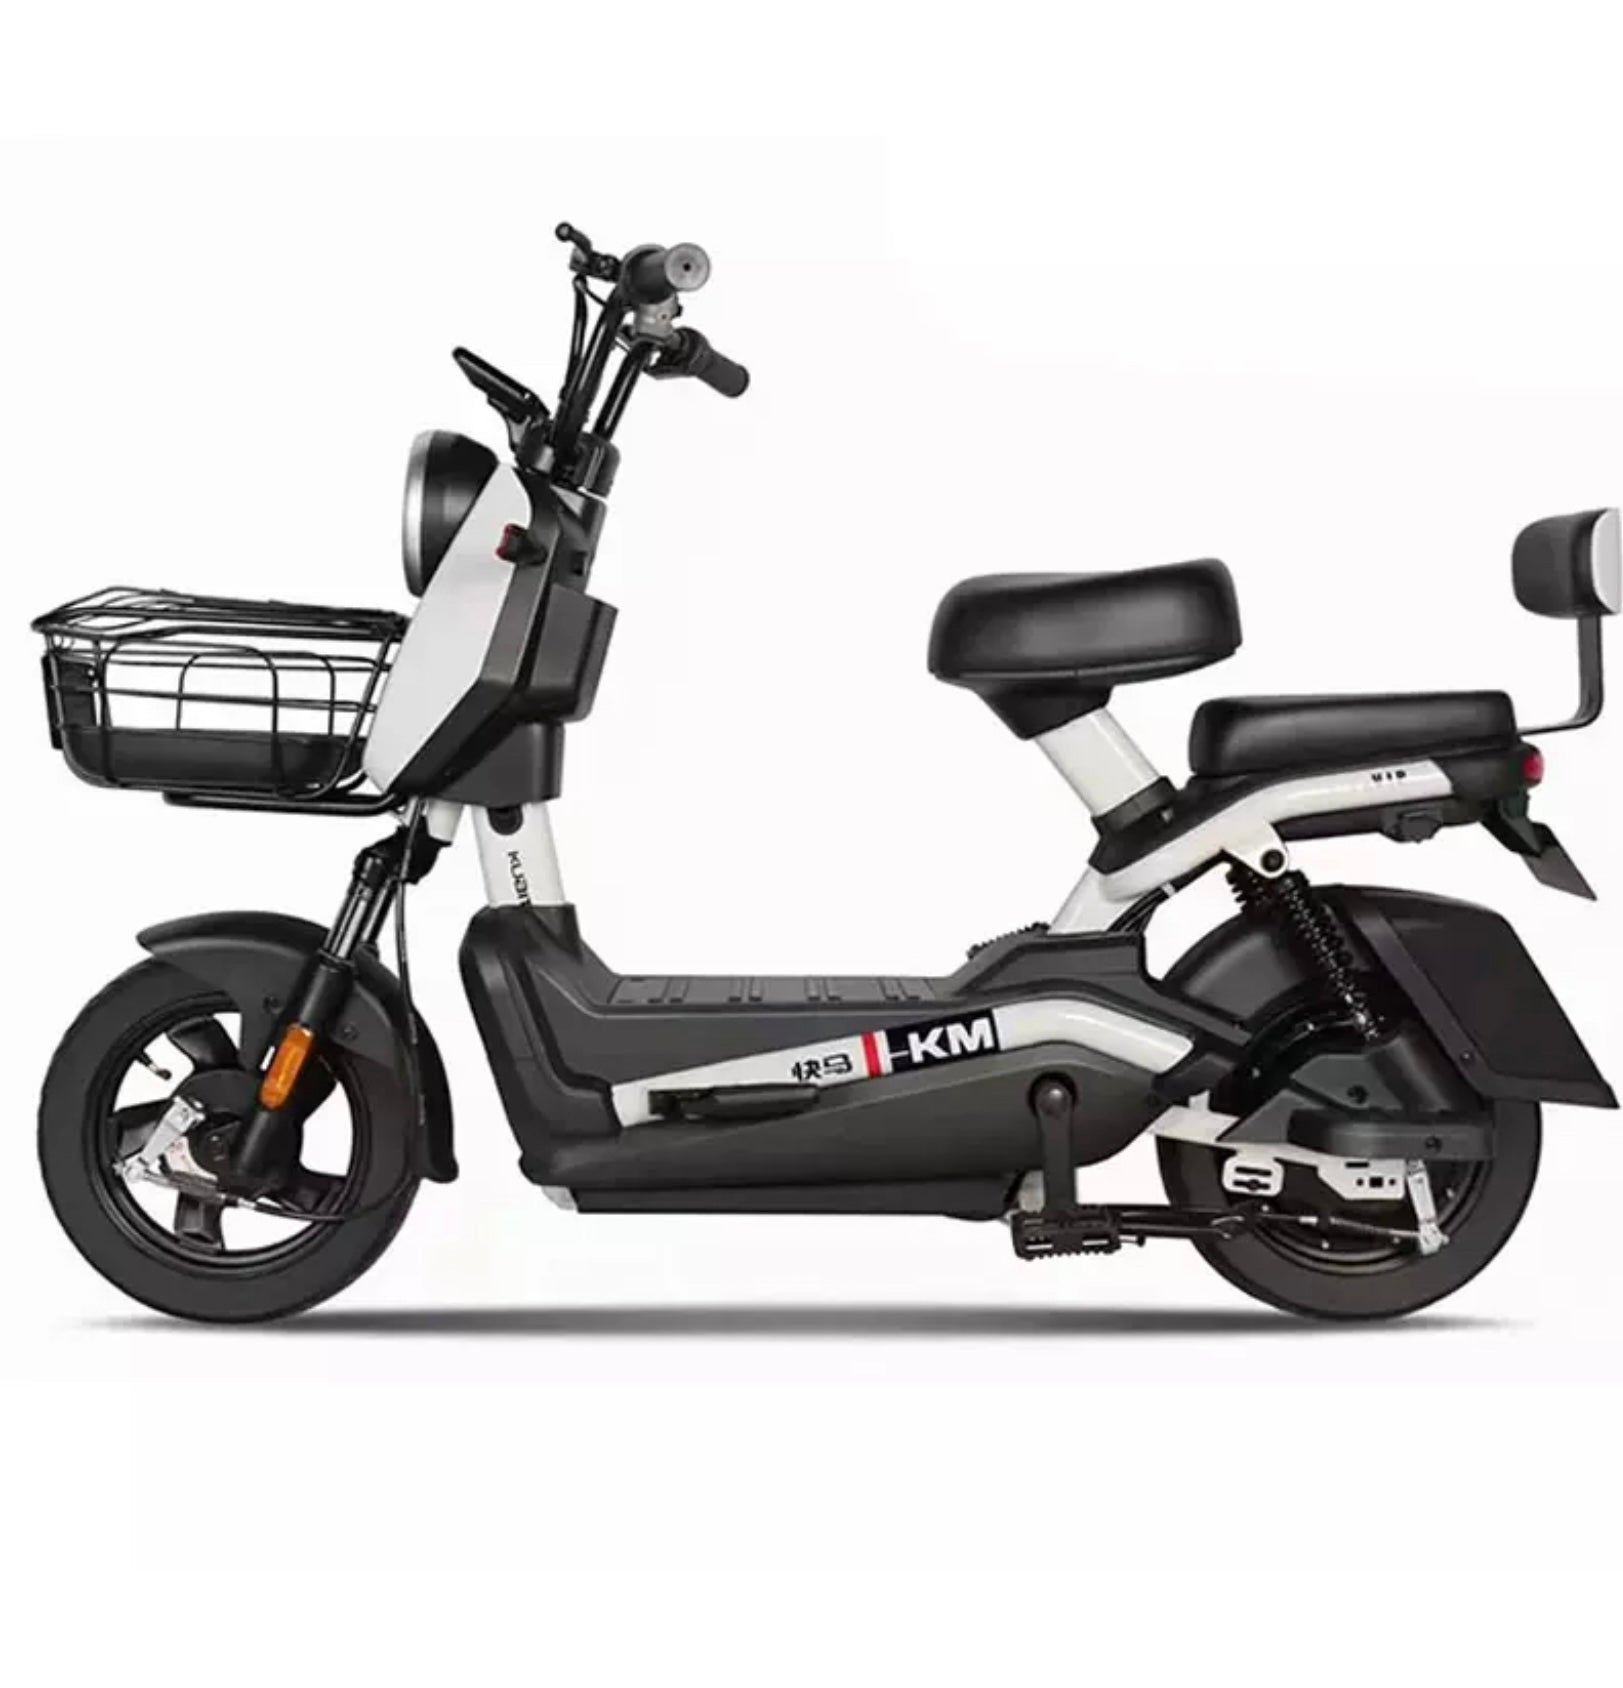 Stealth Avenger 3-Speed Electric Scooter 18MPH, Range 30 Miles- 2 Seated